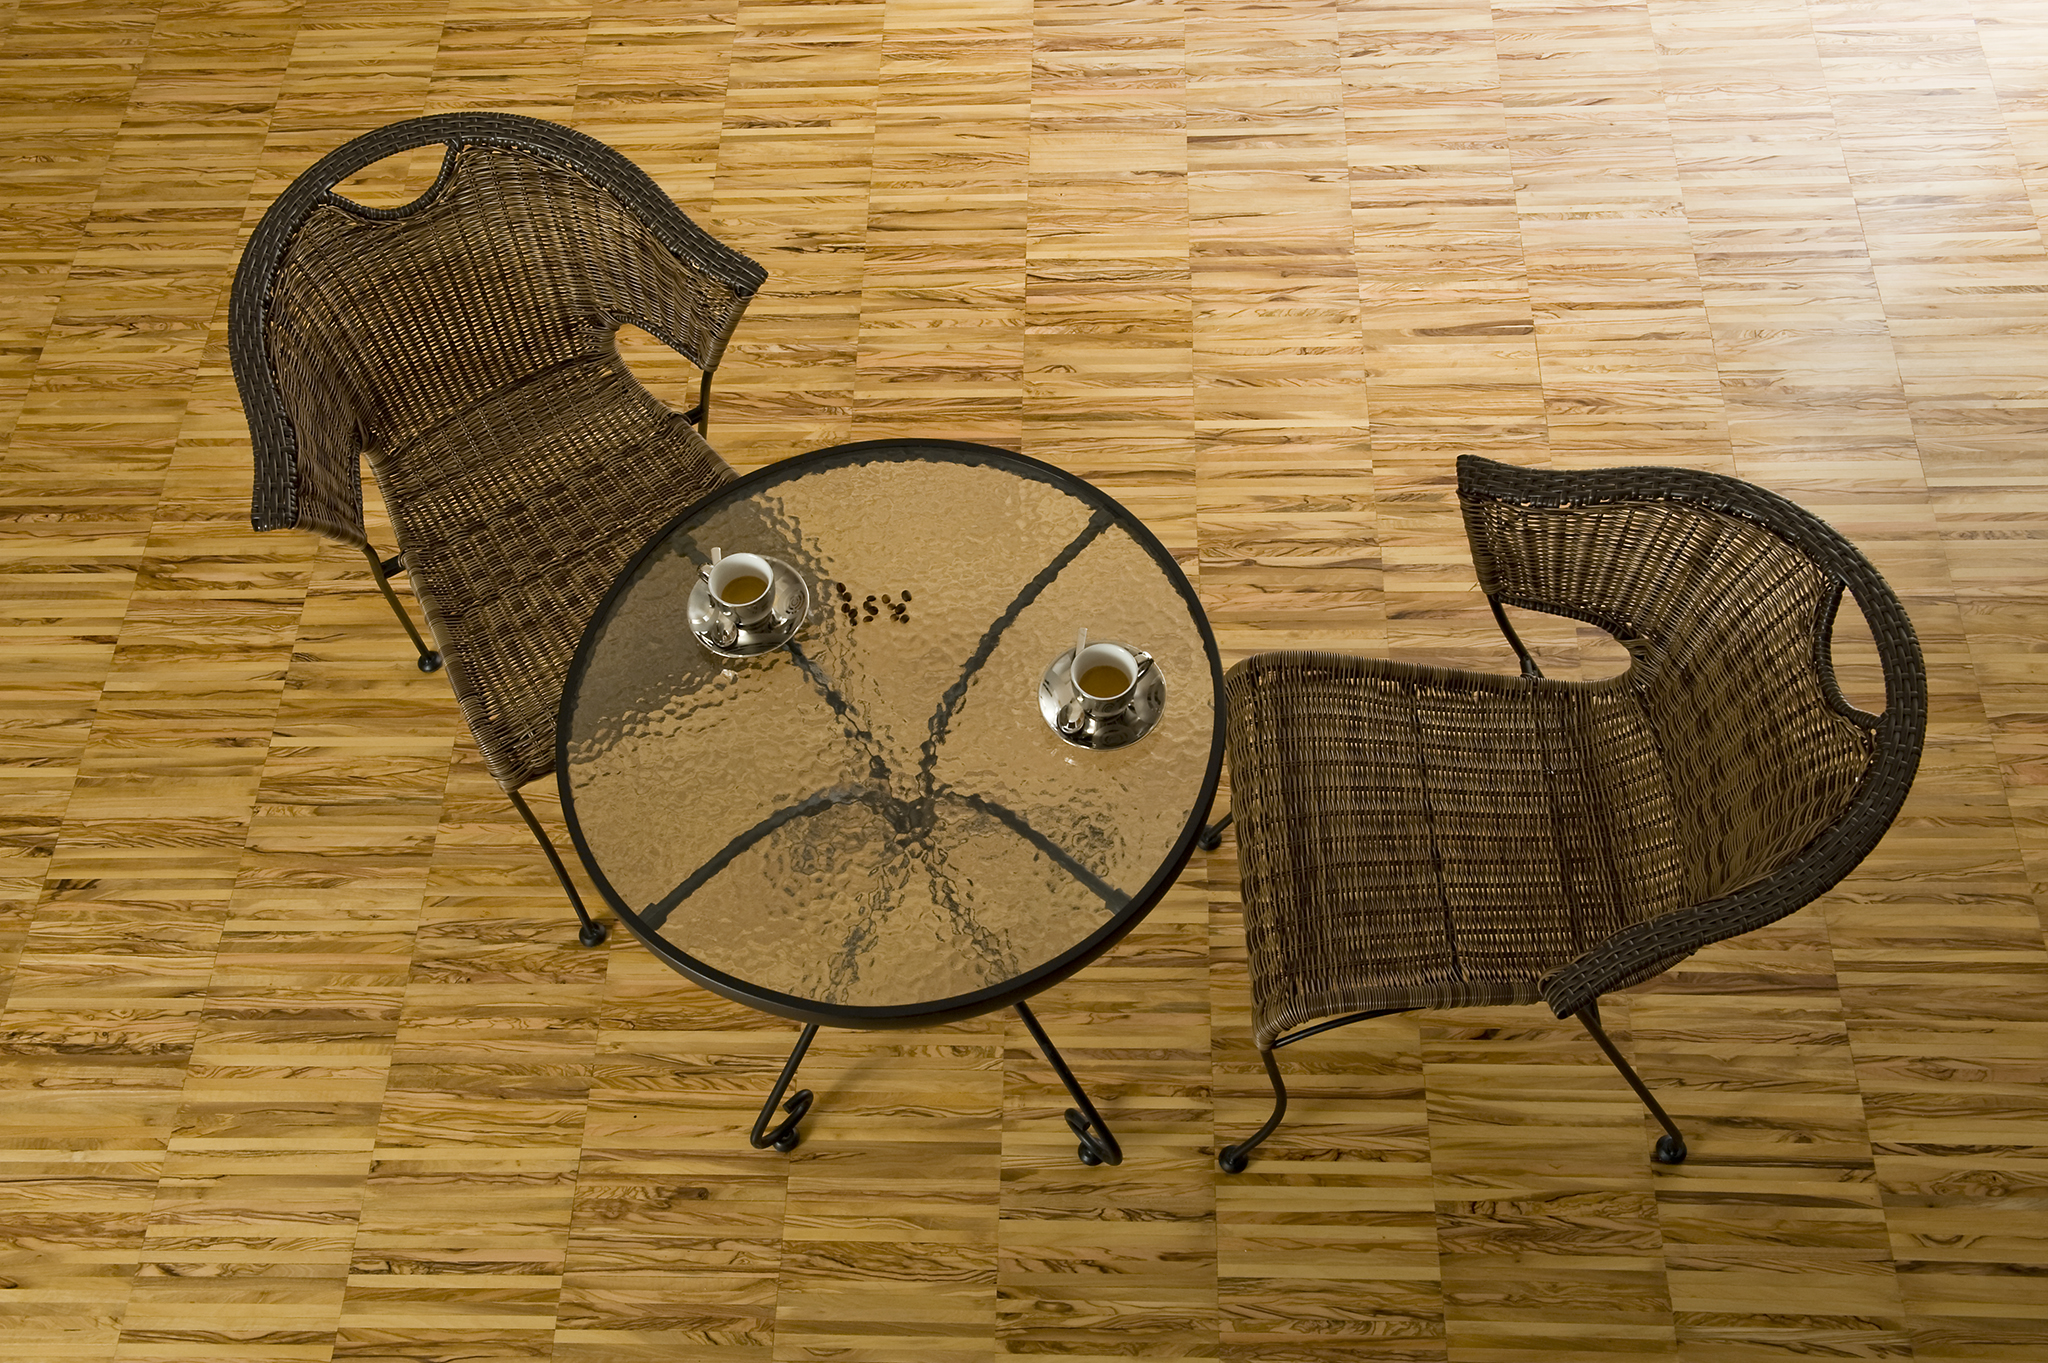 Olive Wood Parquet Industry V10i